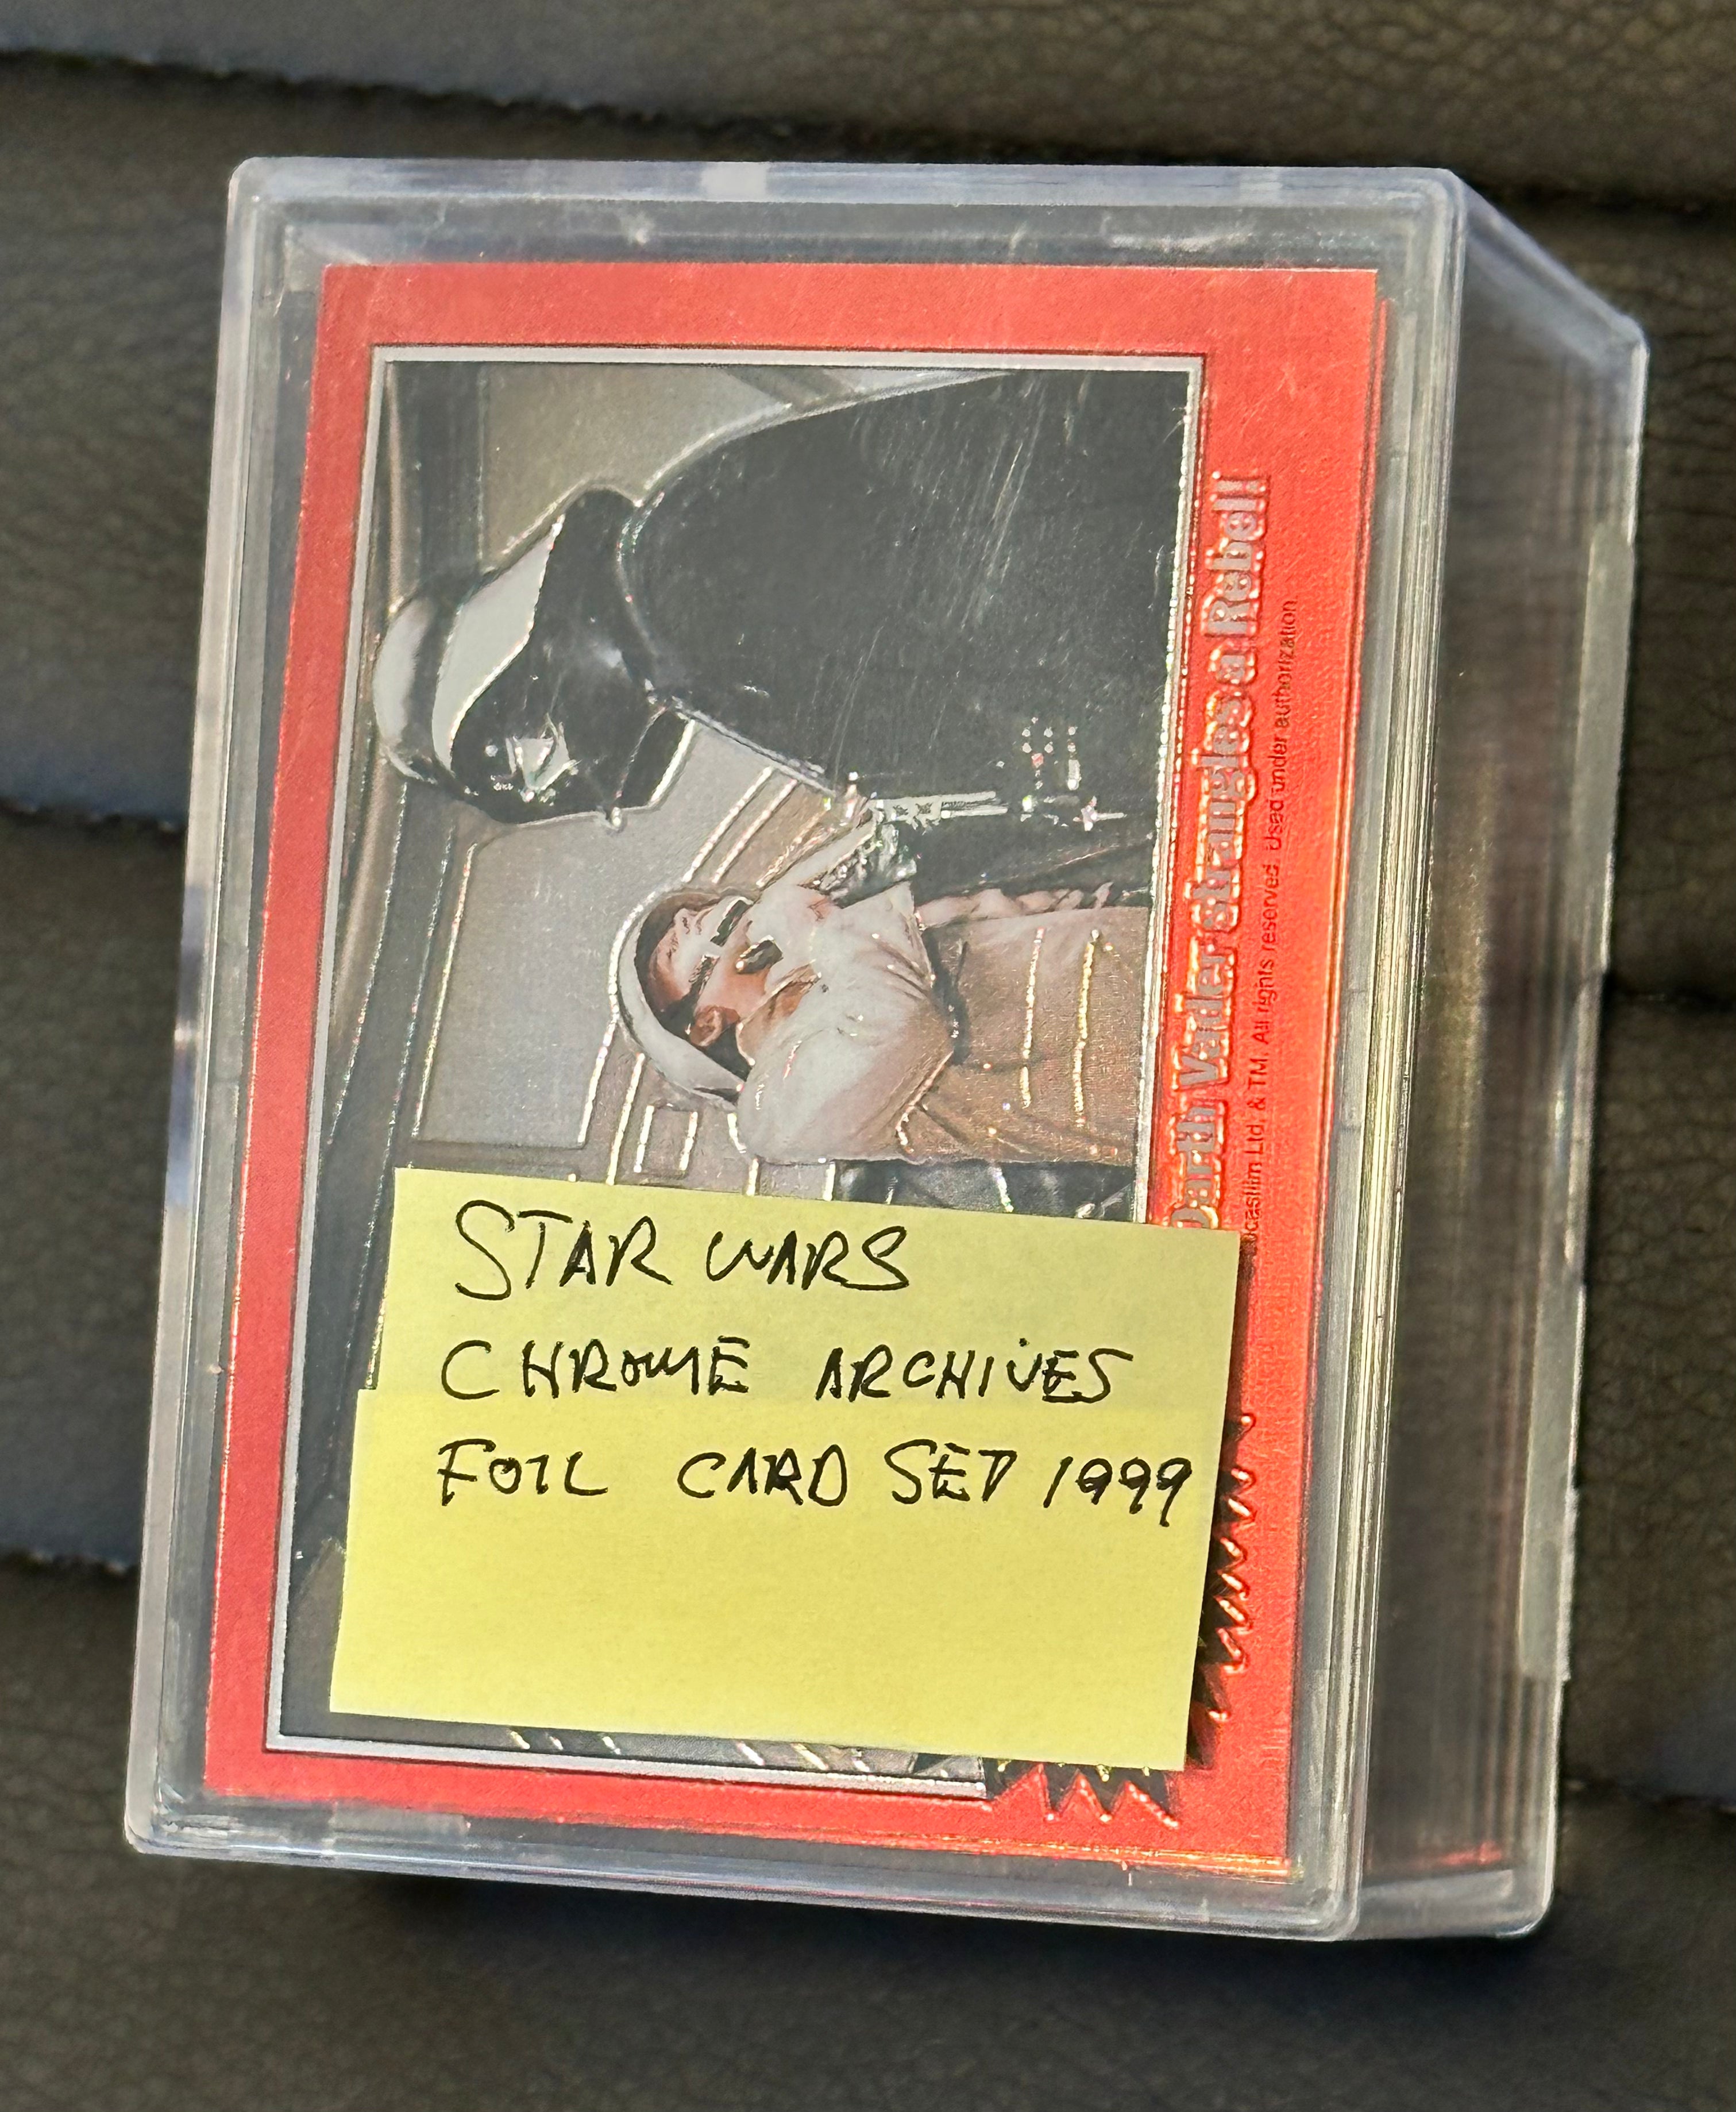 Star Wars Topps Chrome Archives foil high grade condition cards set 1999